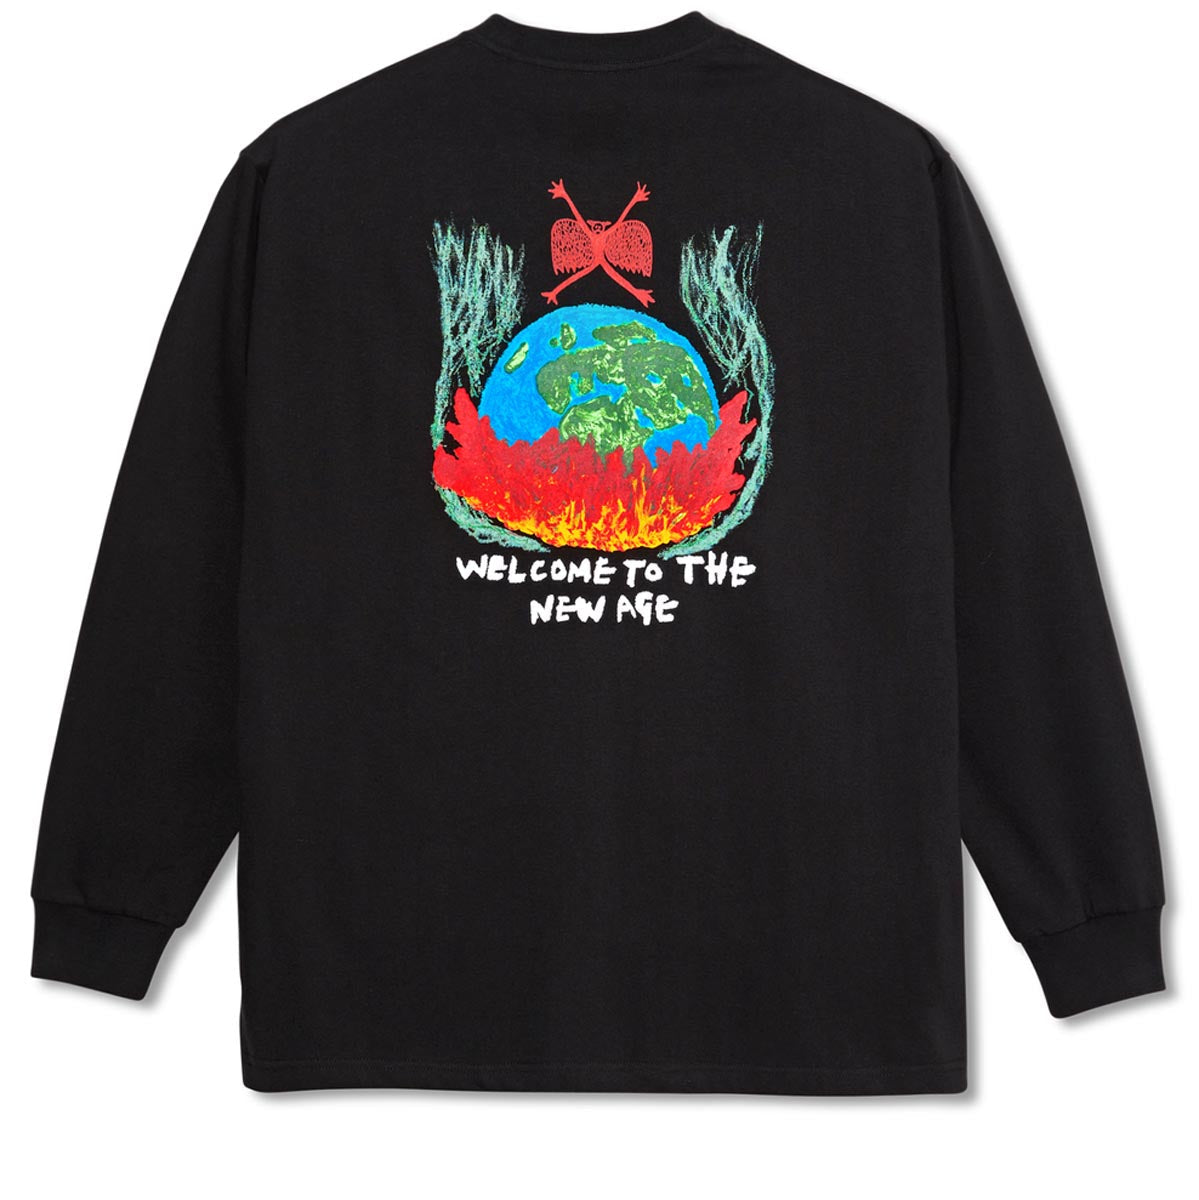 Polar Welcome To The New Age Long Sleeve T-Shirt - Black image 1